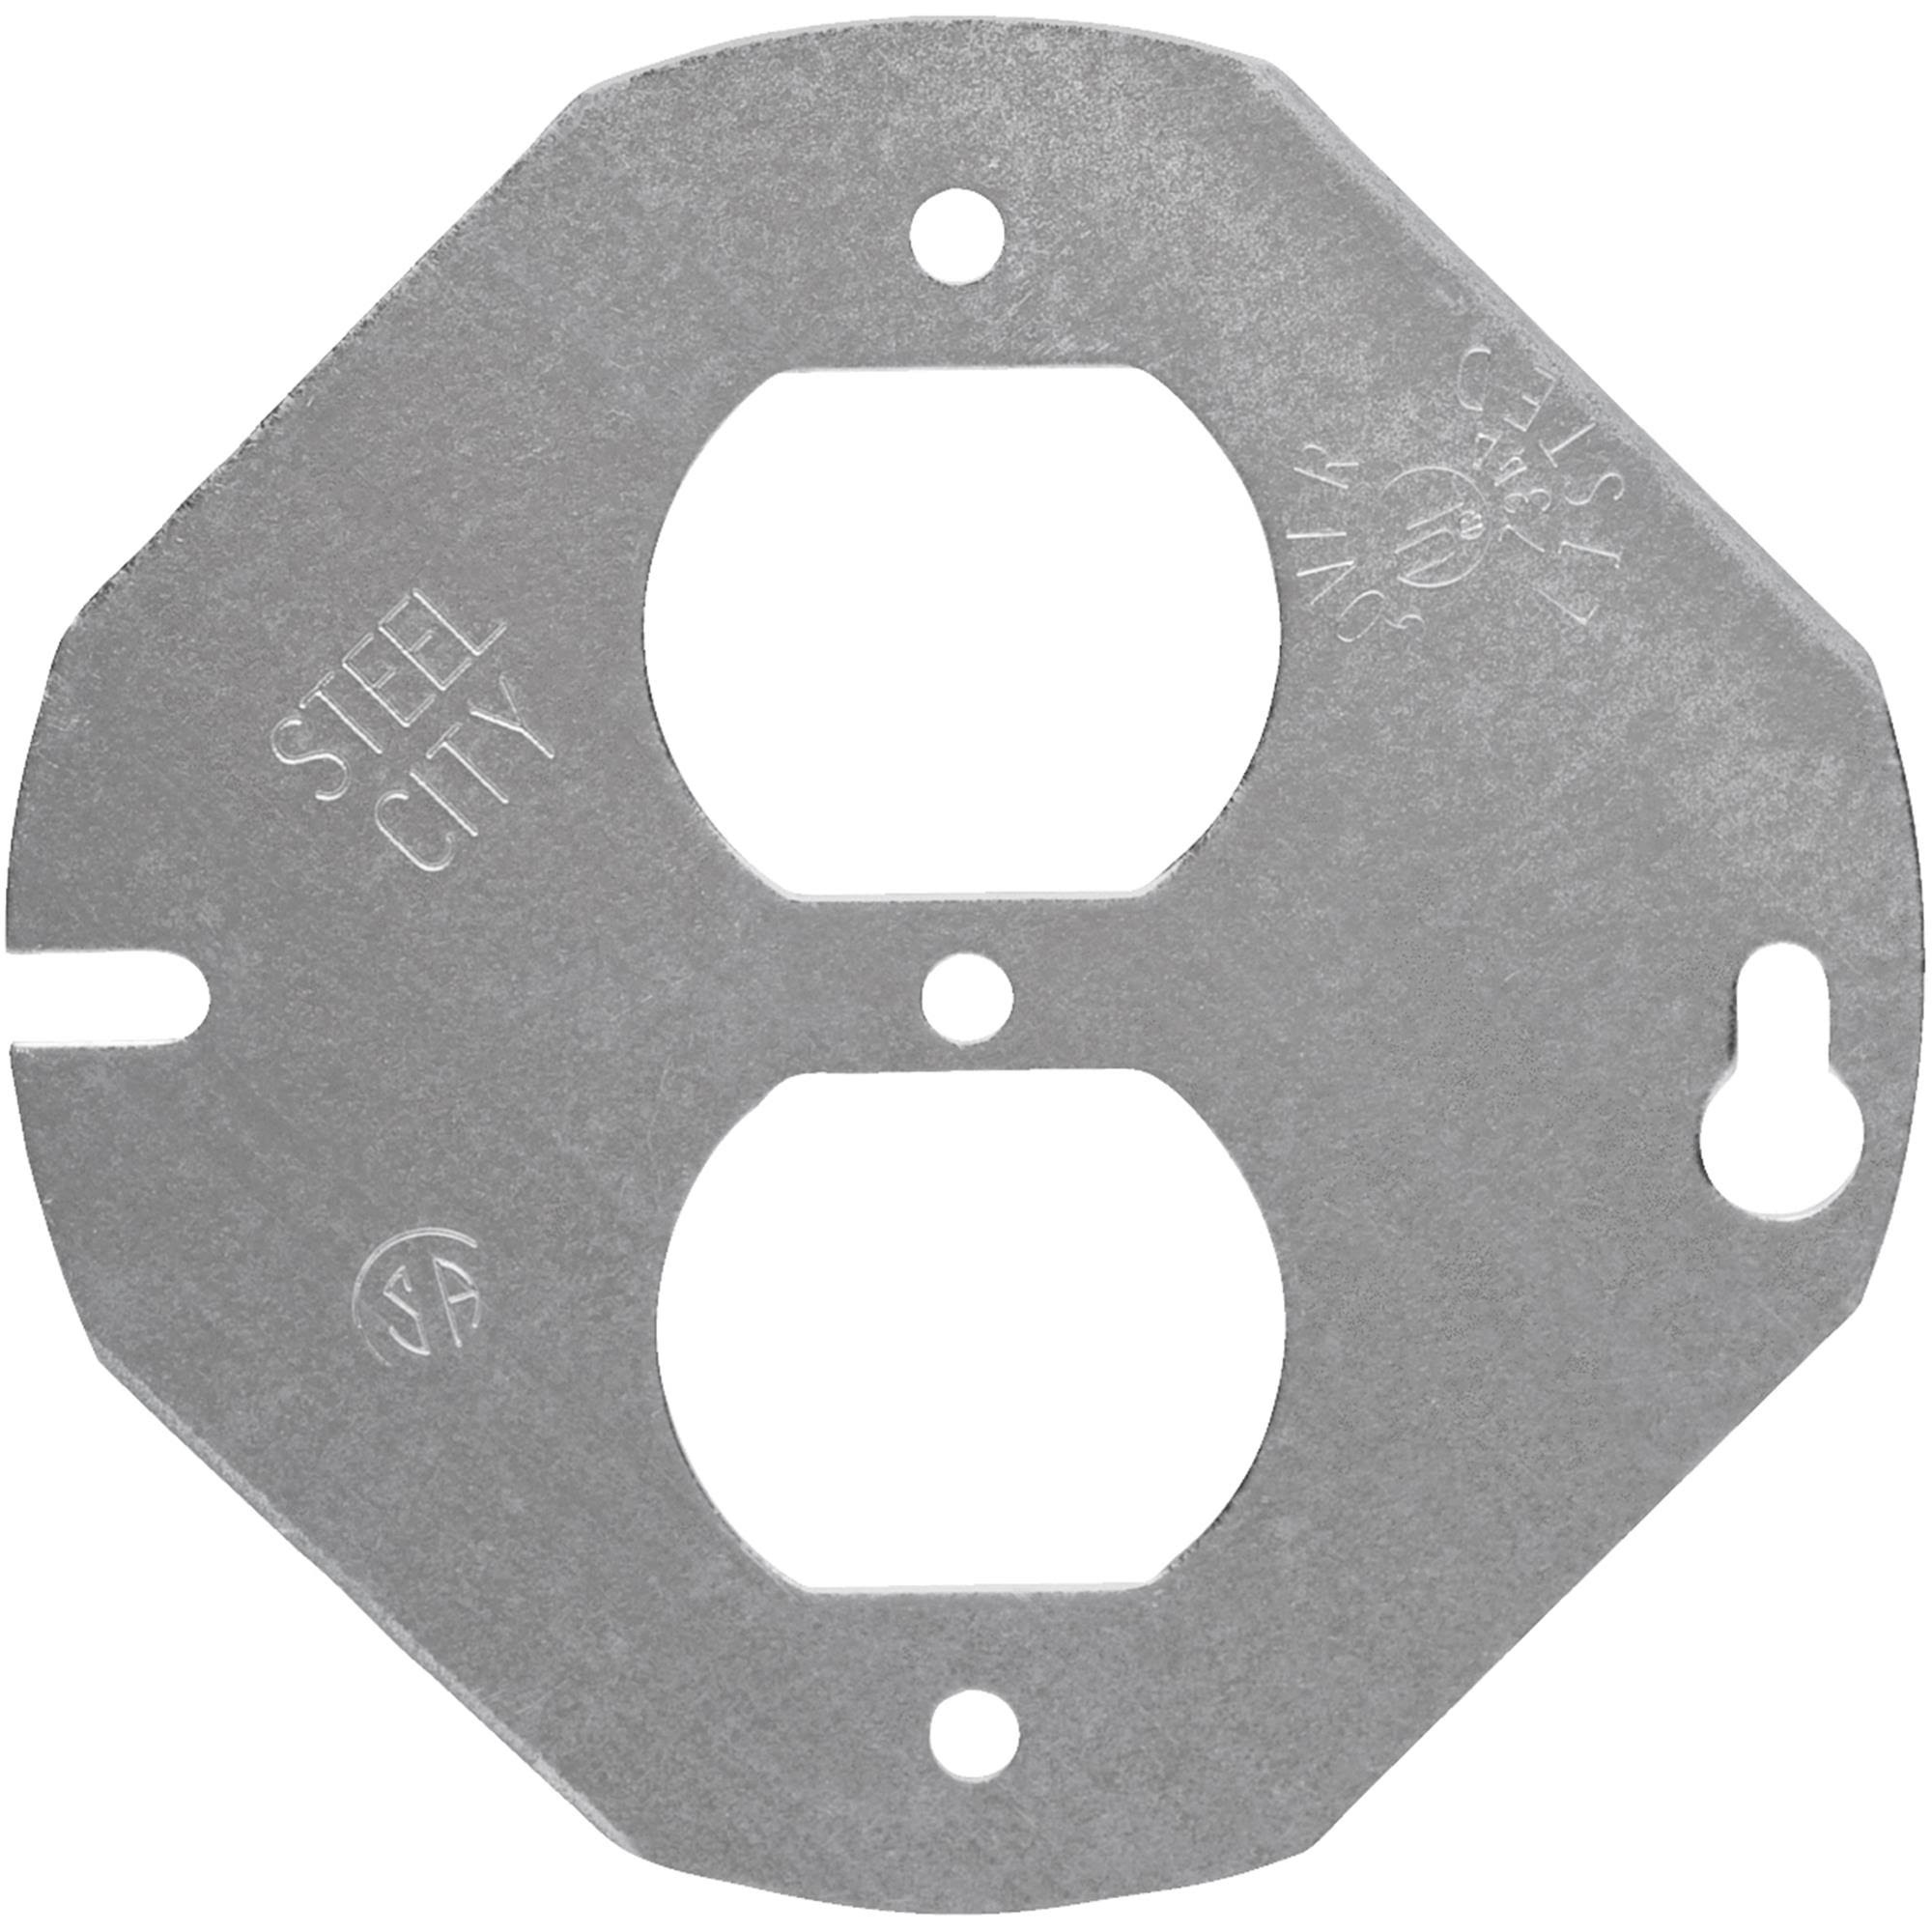 Raco Round Flat Duplex Receptacle Cover - 4"